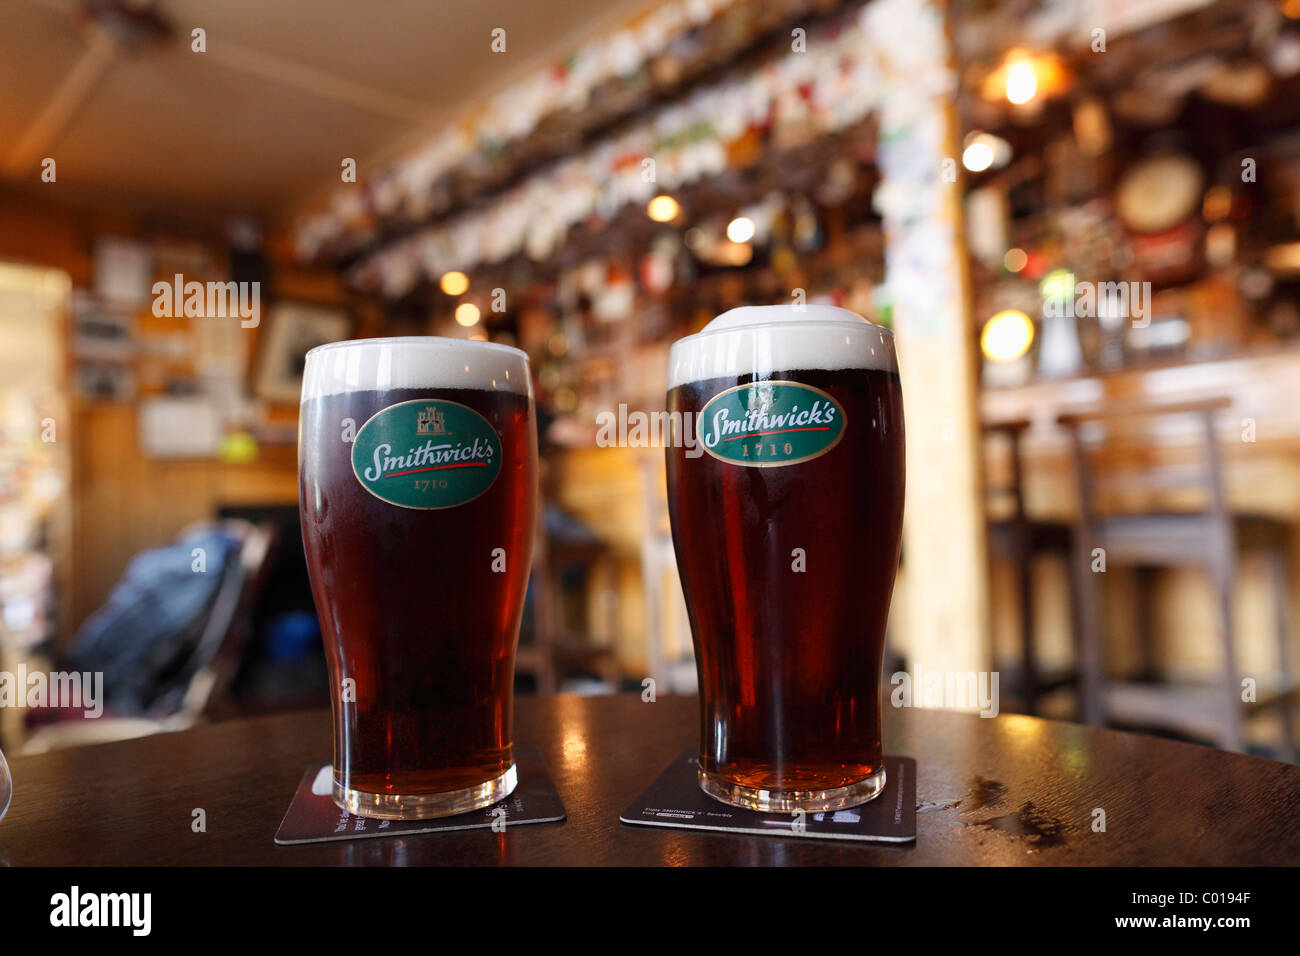 https://c8.alamy.com/comp/C0194F/two-glasses-of-smithwicks-stout-beer-in-a-pub-in-shannonbridge-county-C0194F.jpg